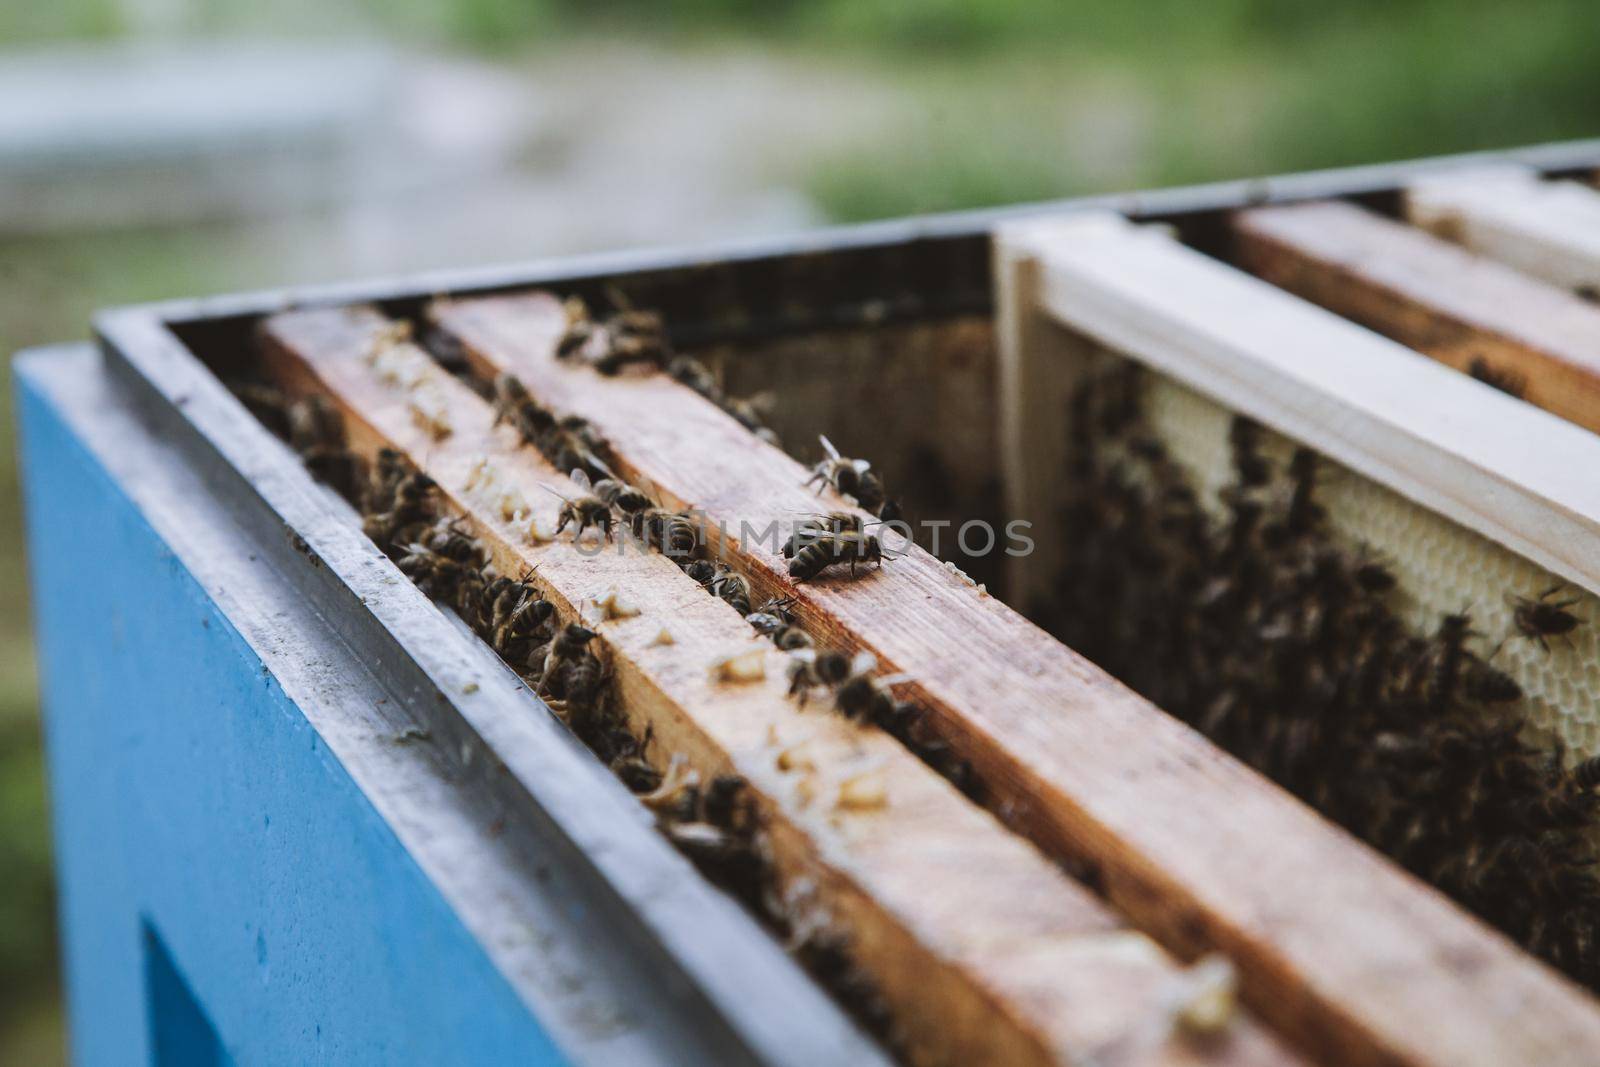 Group of yellow bees on the hive frame. Apiary.